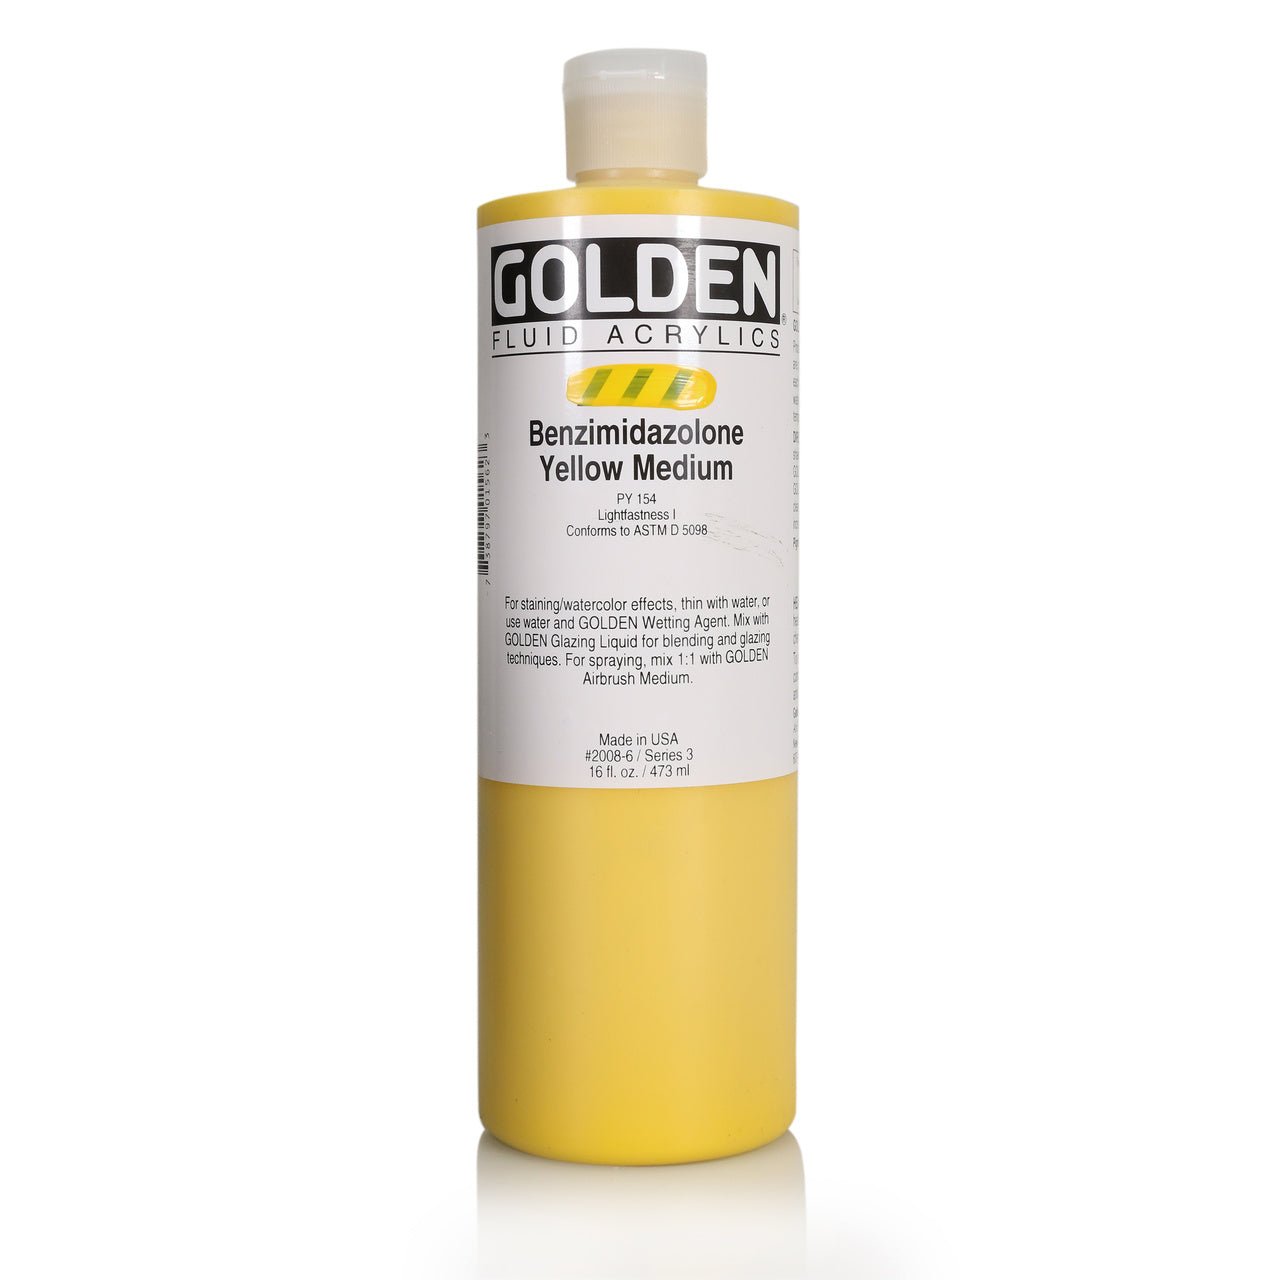 Golden GEL MEDIUMS, Molding Paste Ready-made Colors